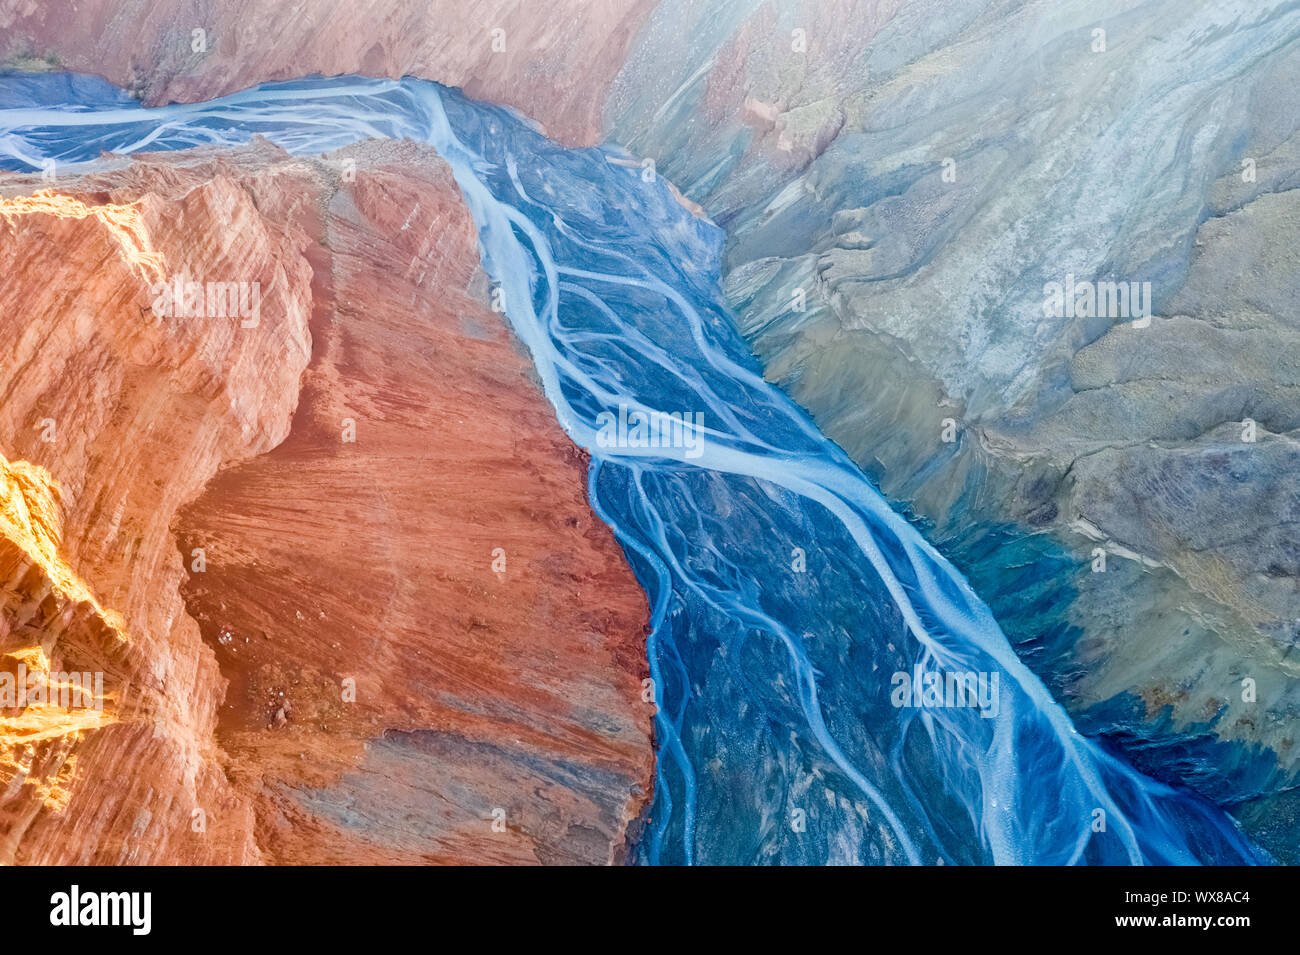 canyon riverbed ike a blood vessel Stock Photo